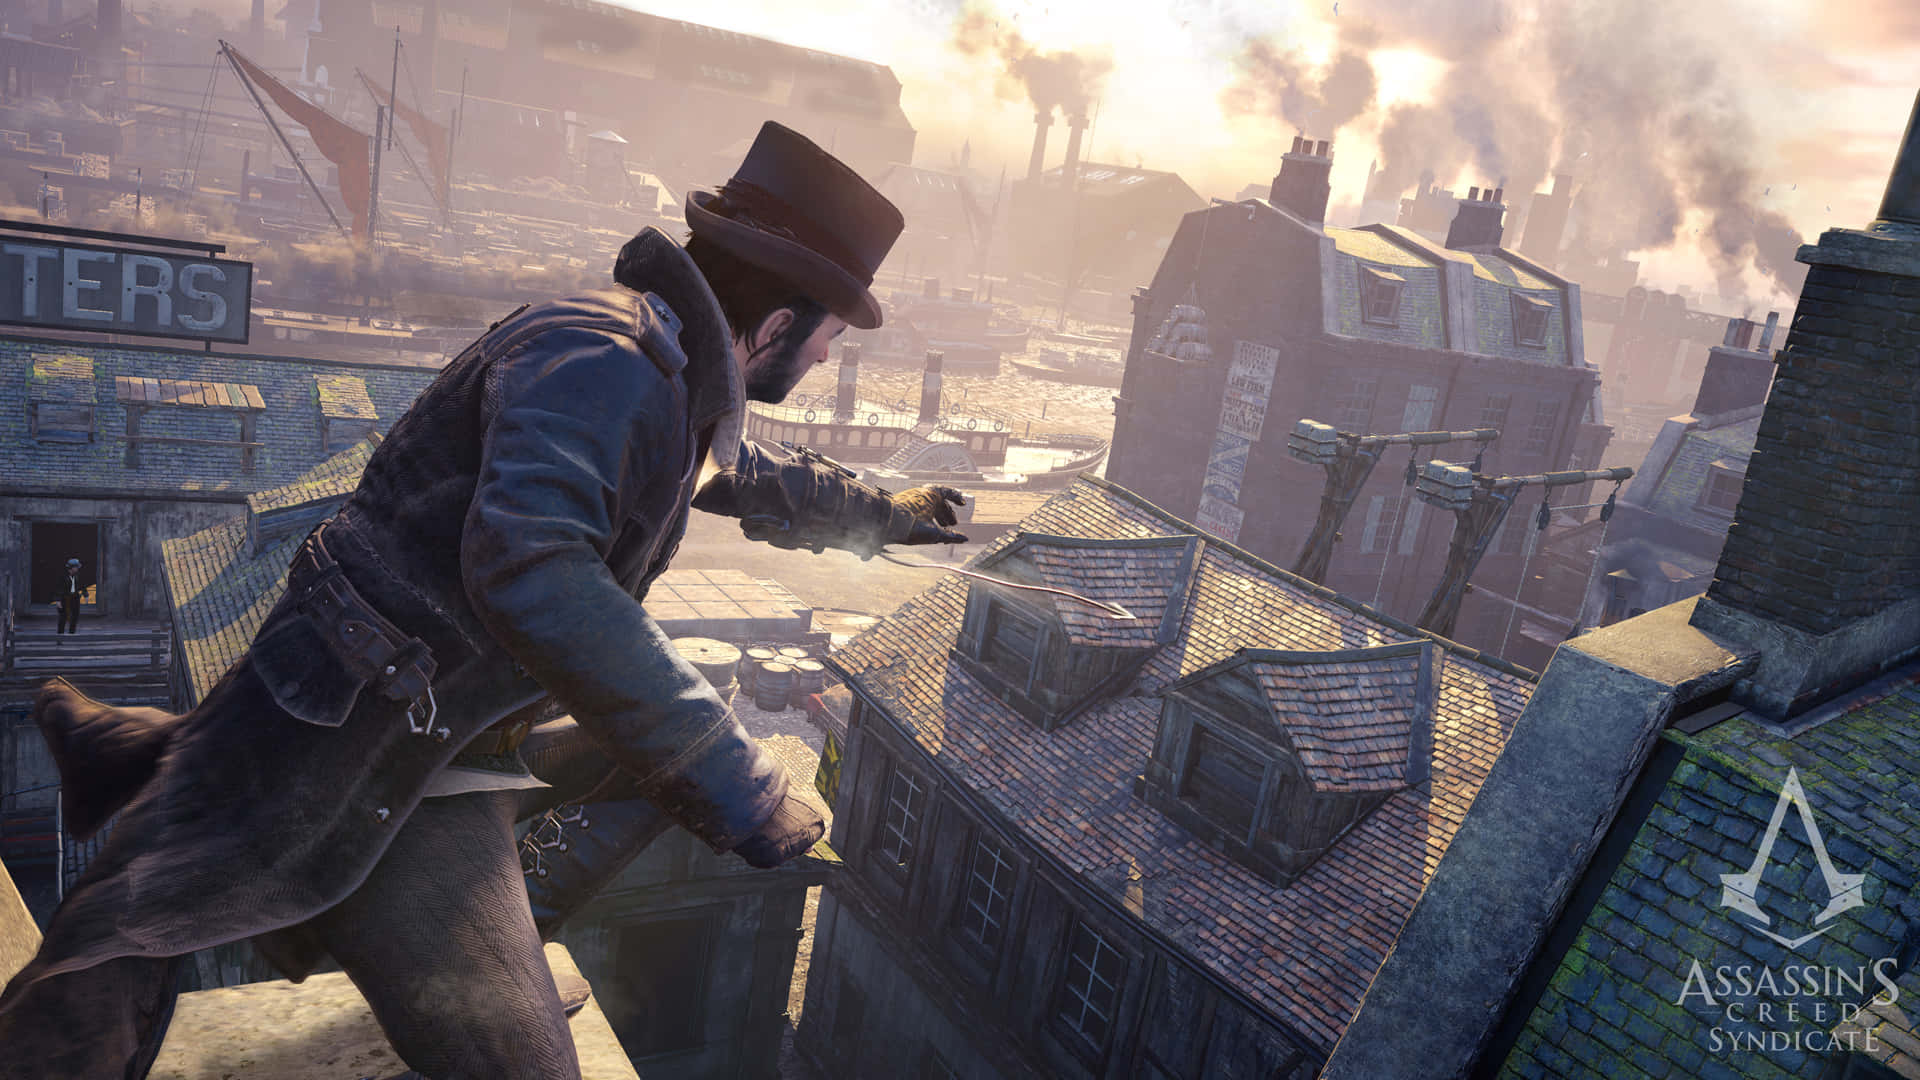 Jacob Frye - Assassin's Creed Syndicate protagonist Wallpaper